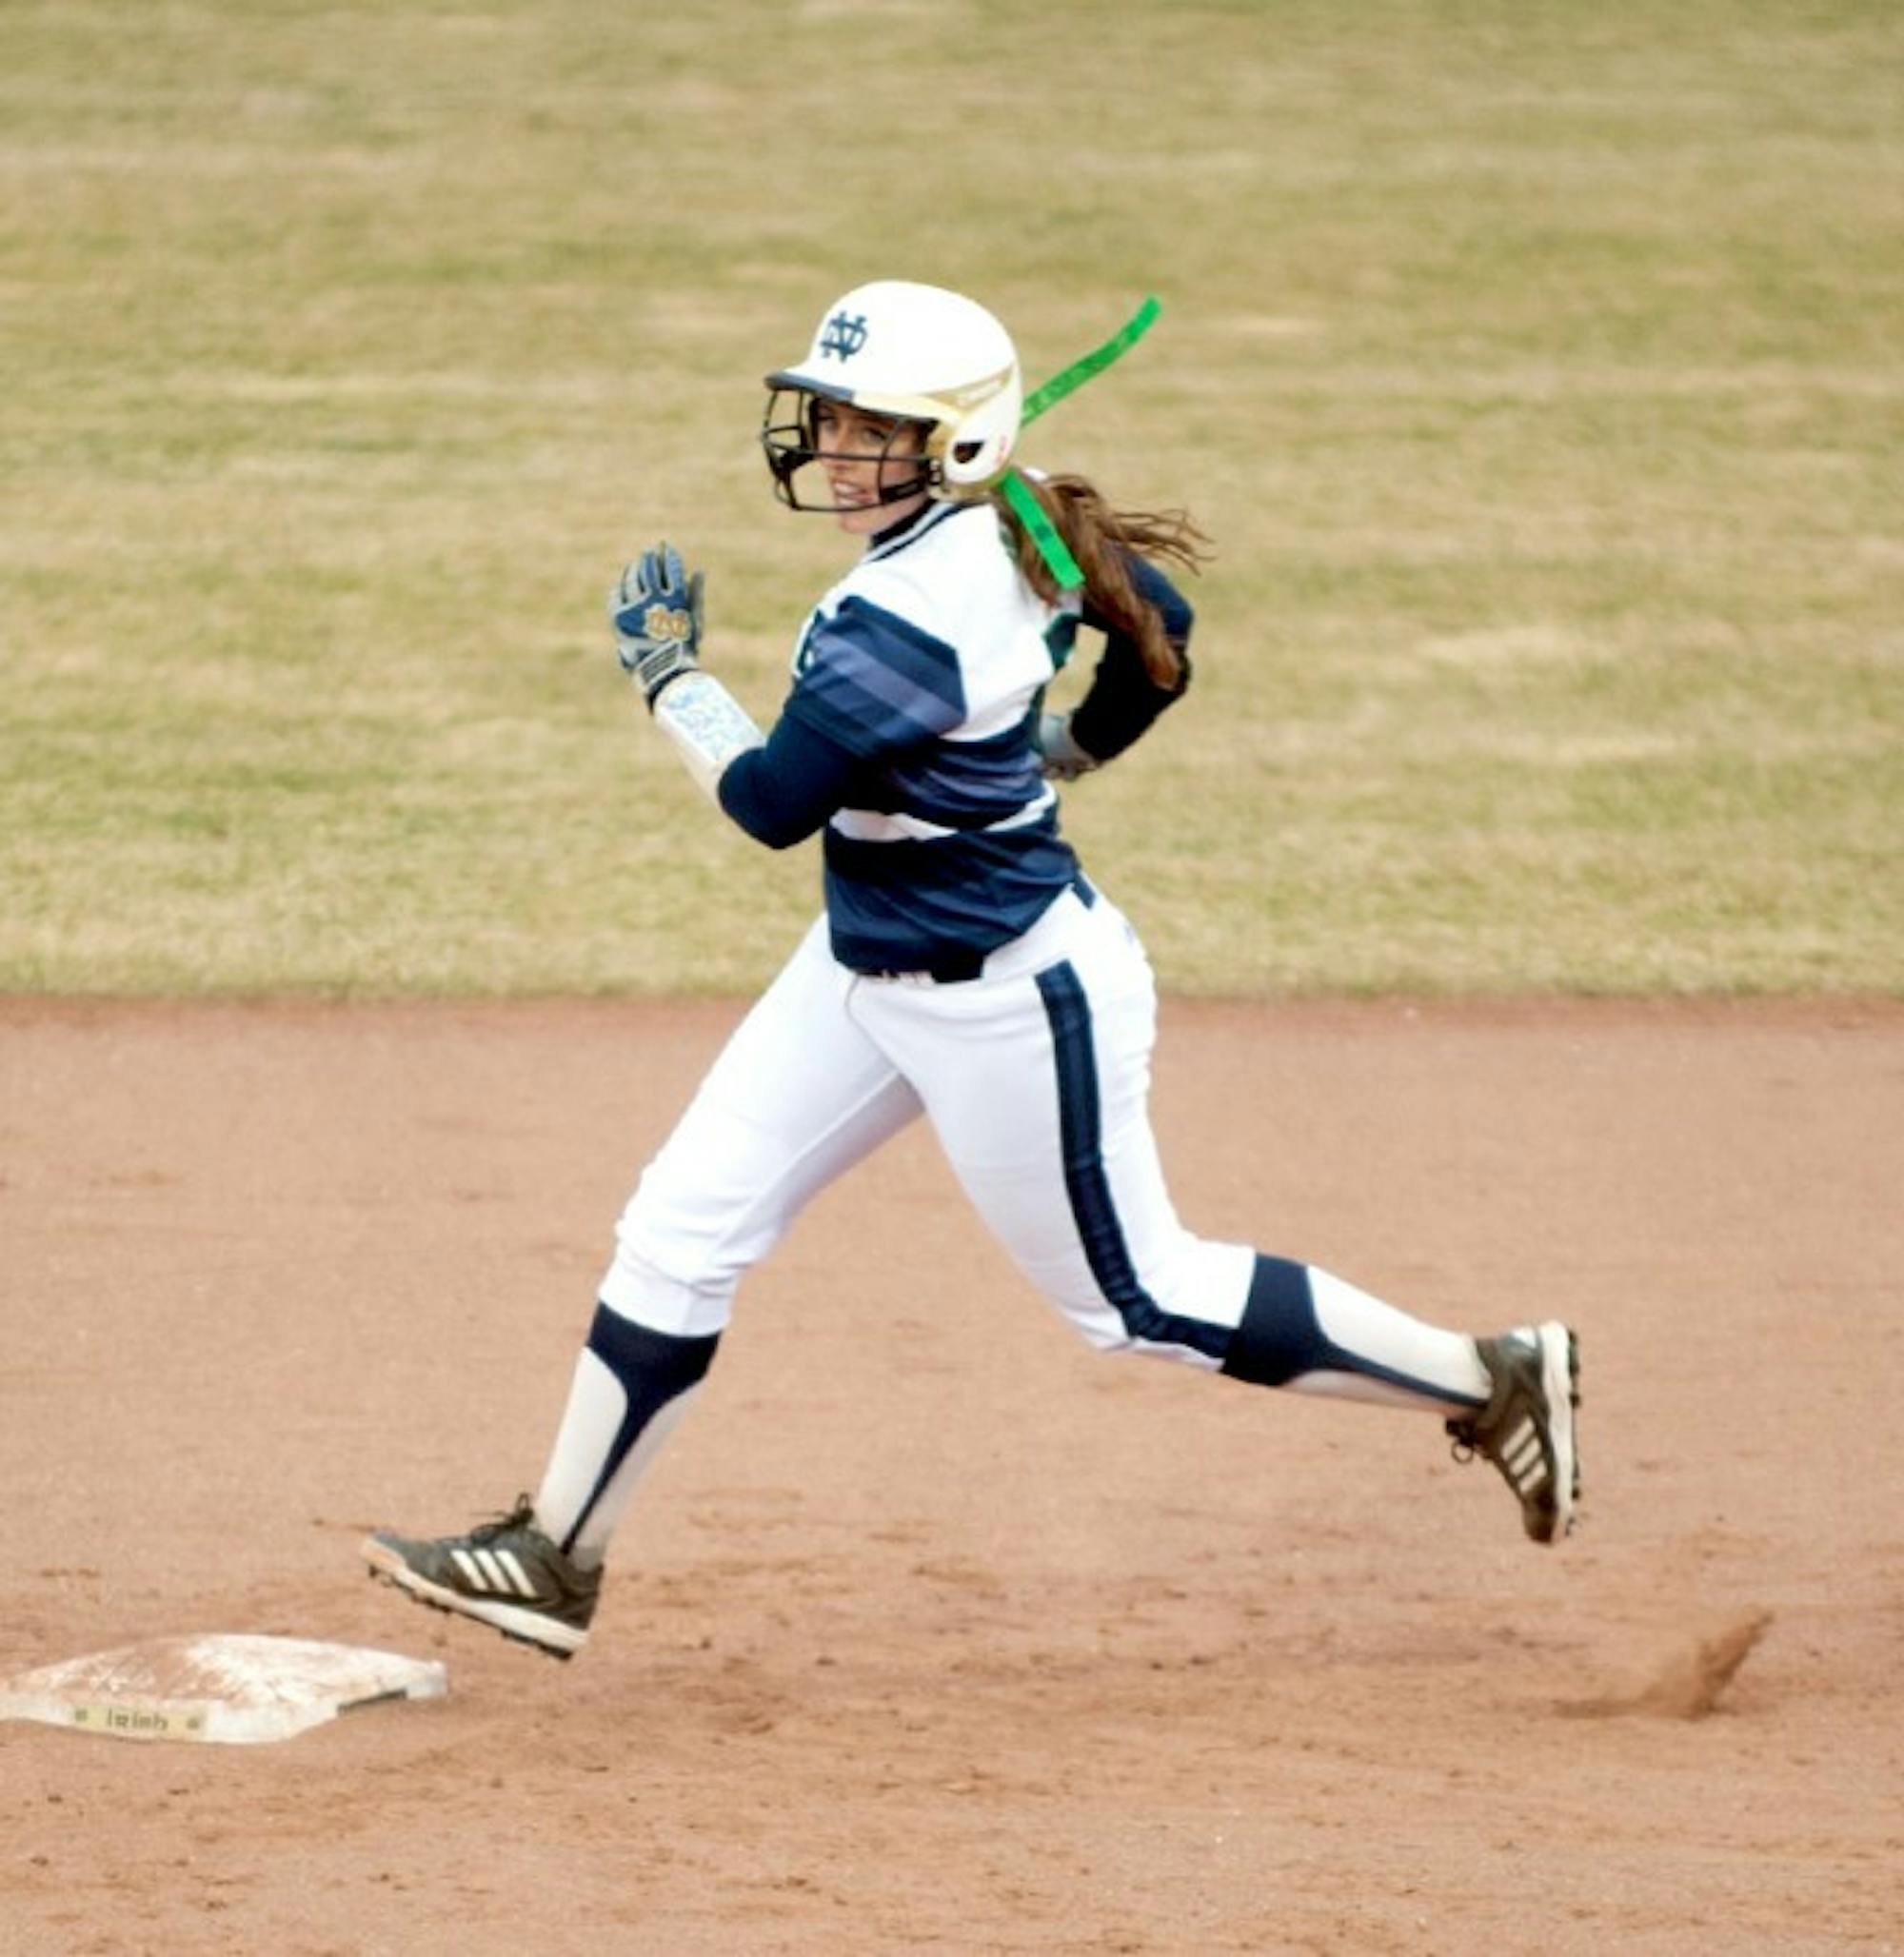 Sophomore first baseman Micaela Arizmendi  rounds second base last night against Michigan State. Arizmendi had two hits, including a homerun, and three RBIs in the Irish victory.